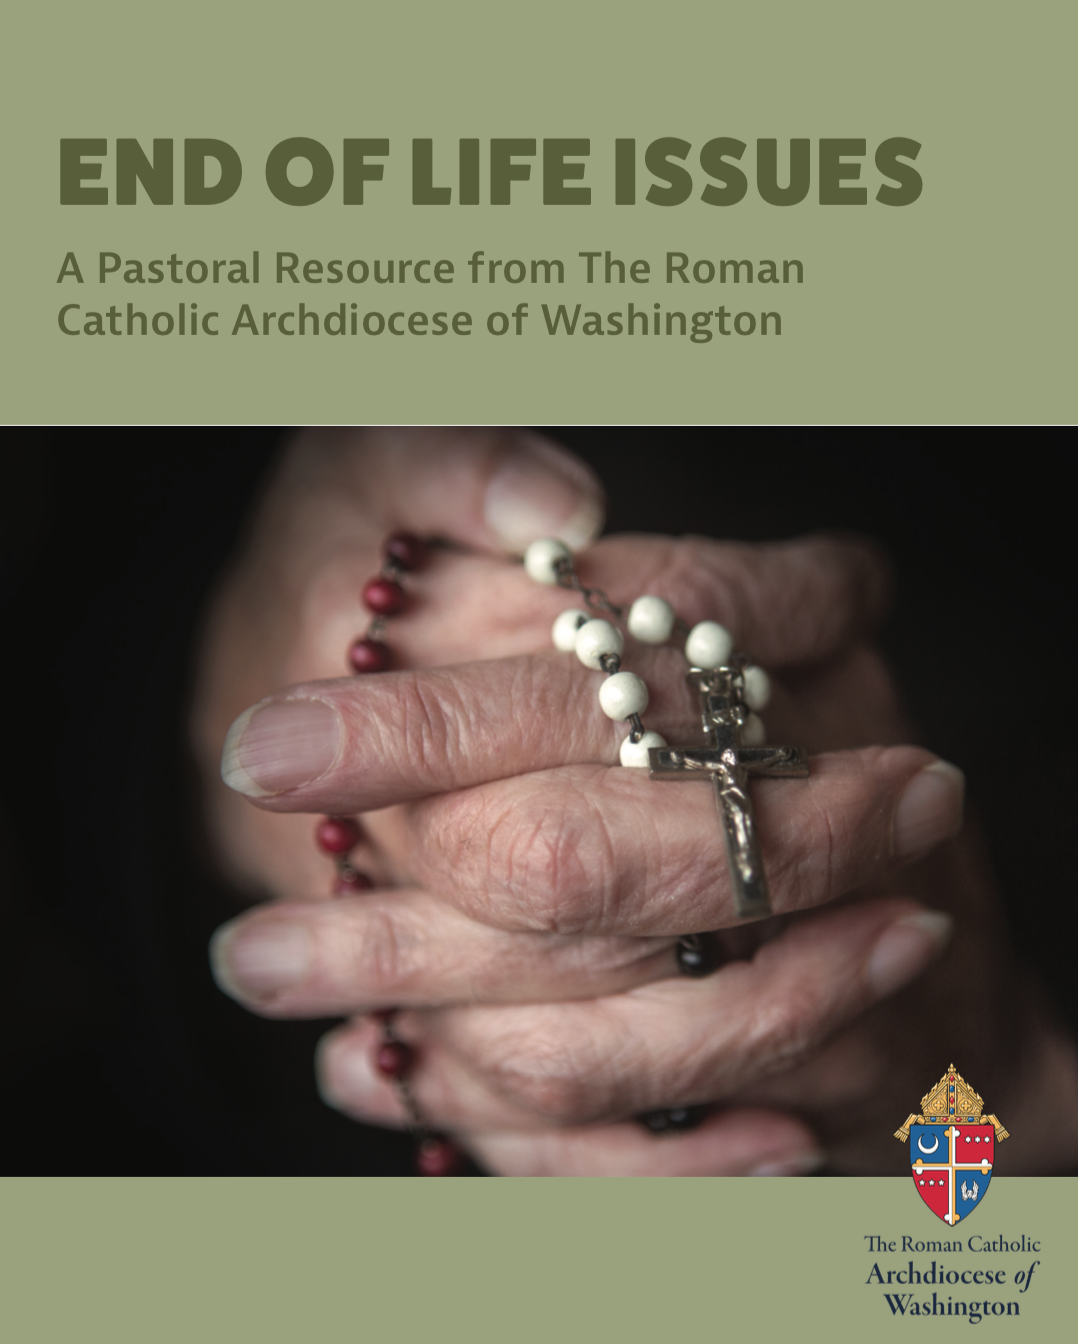 End of Life Issues pastoral resource